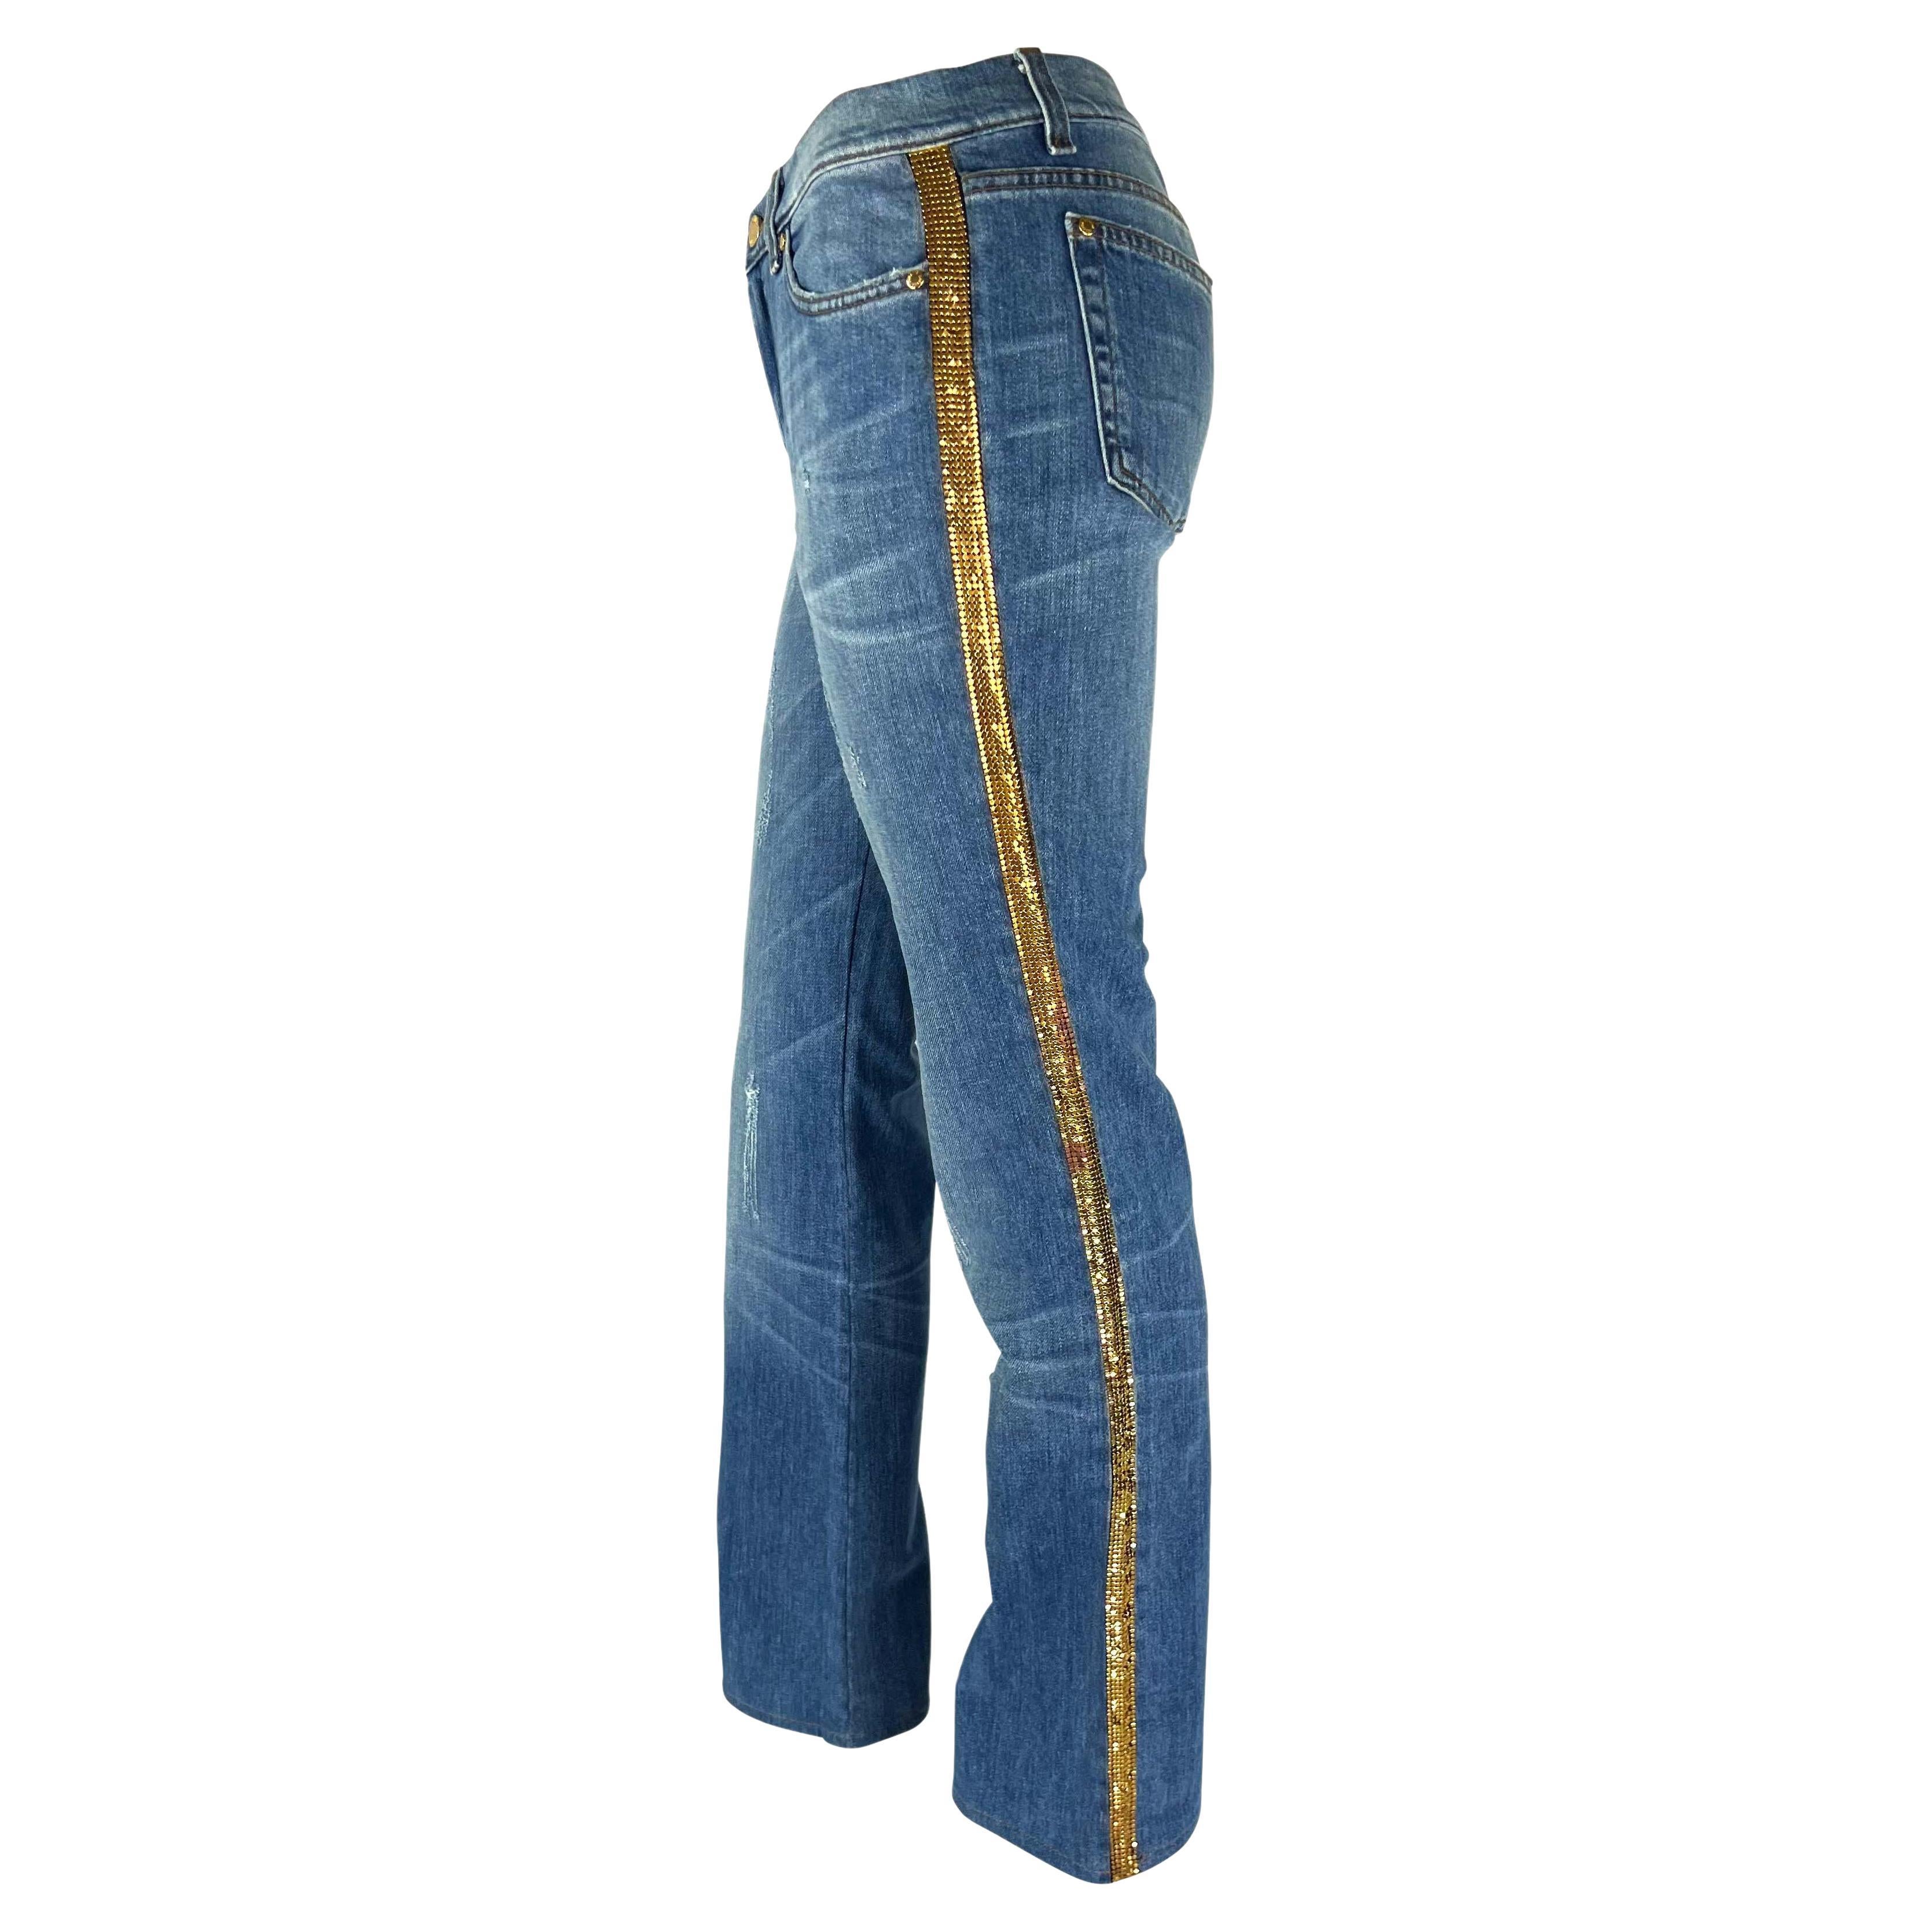 jeans with rhinestones down the side